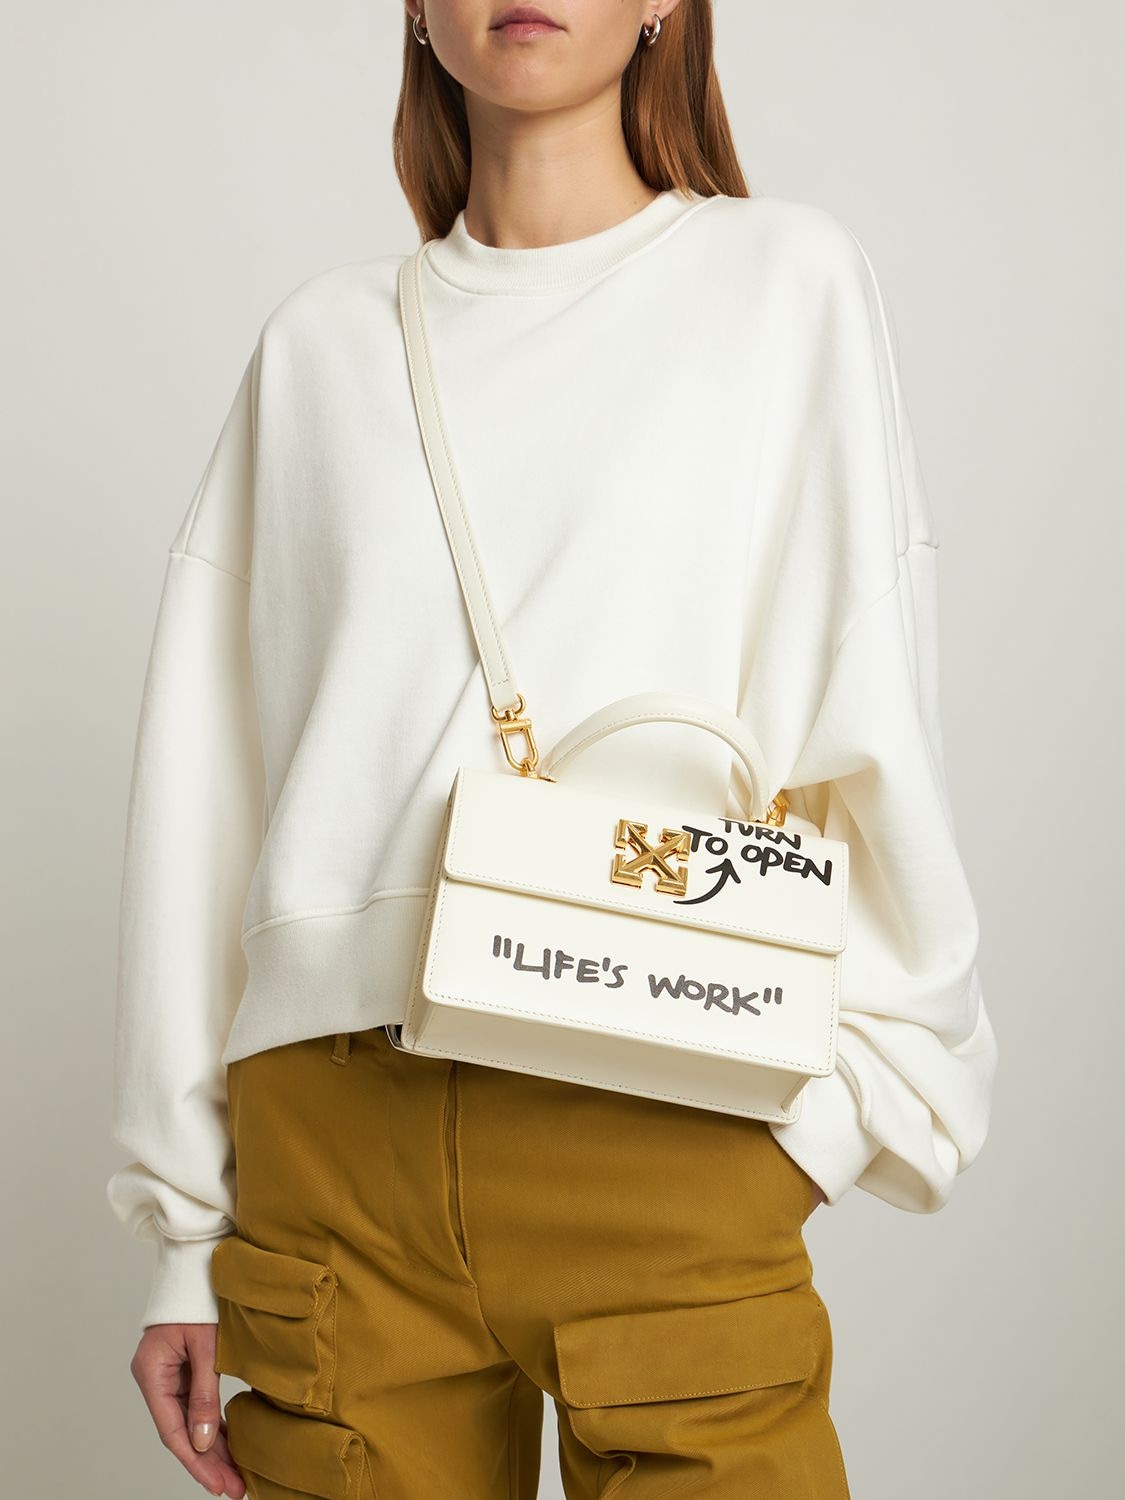 Shop Off-white Jitney 1.4 Leather Top Handle Bag In White